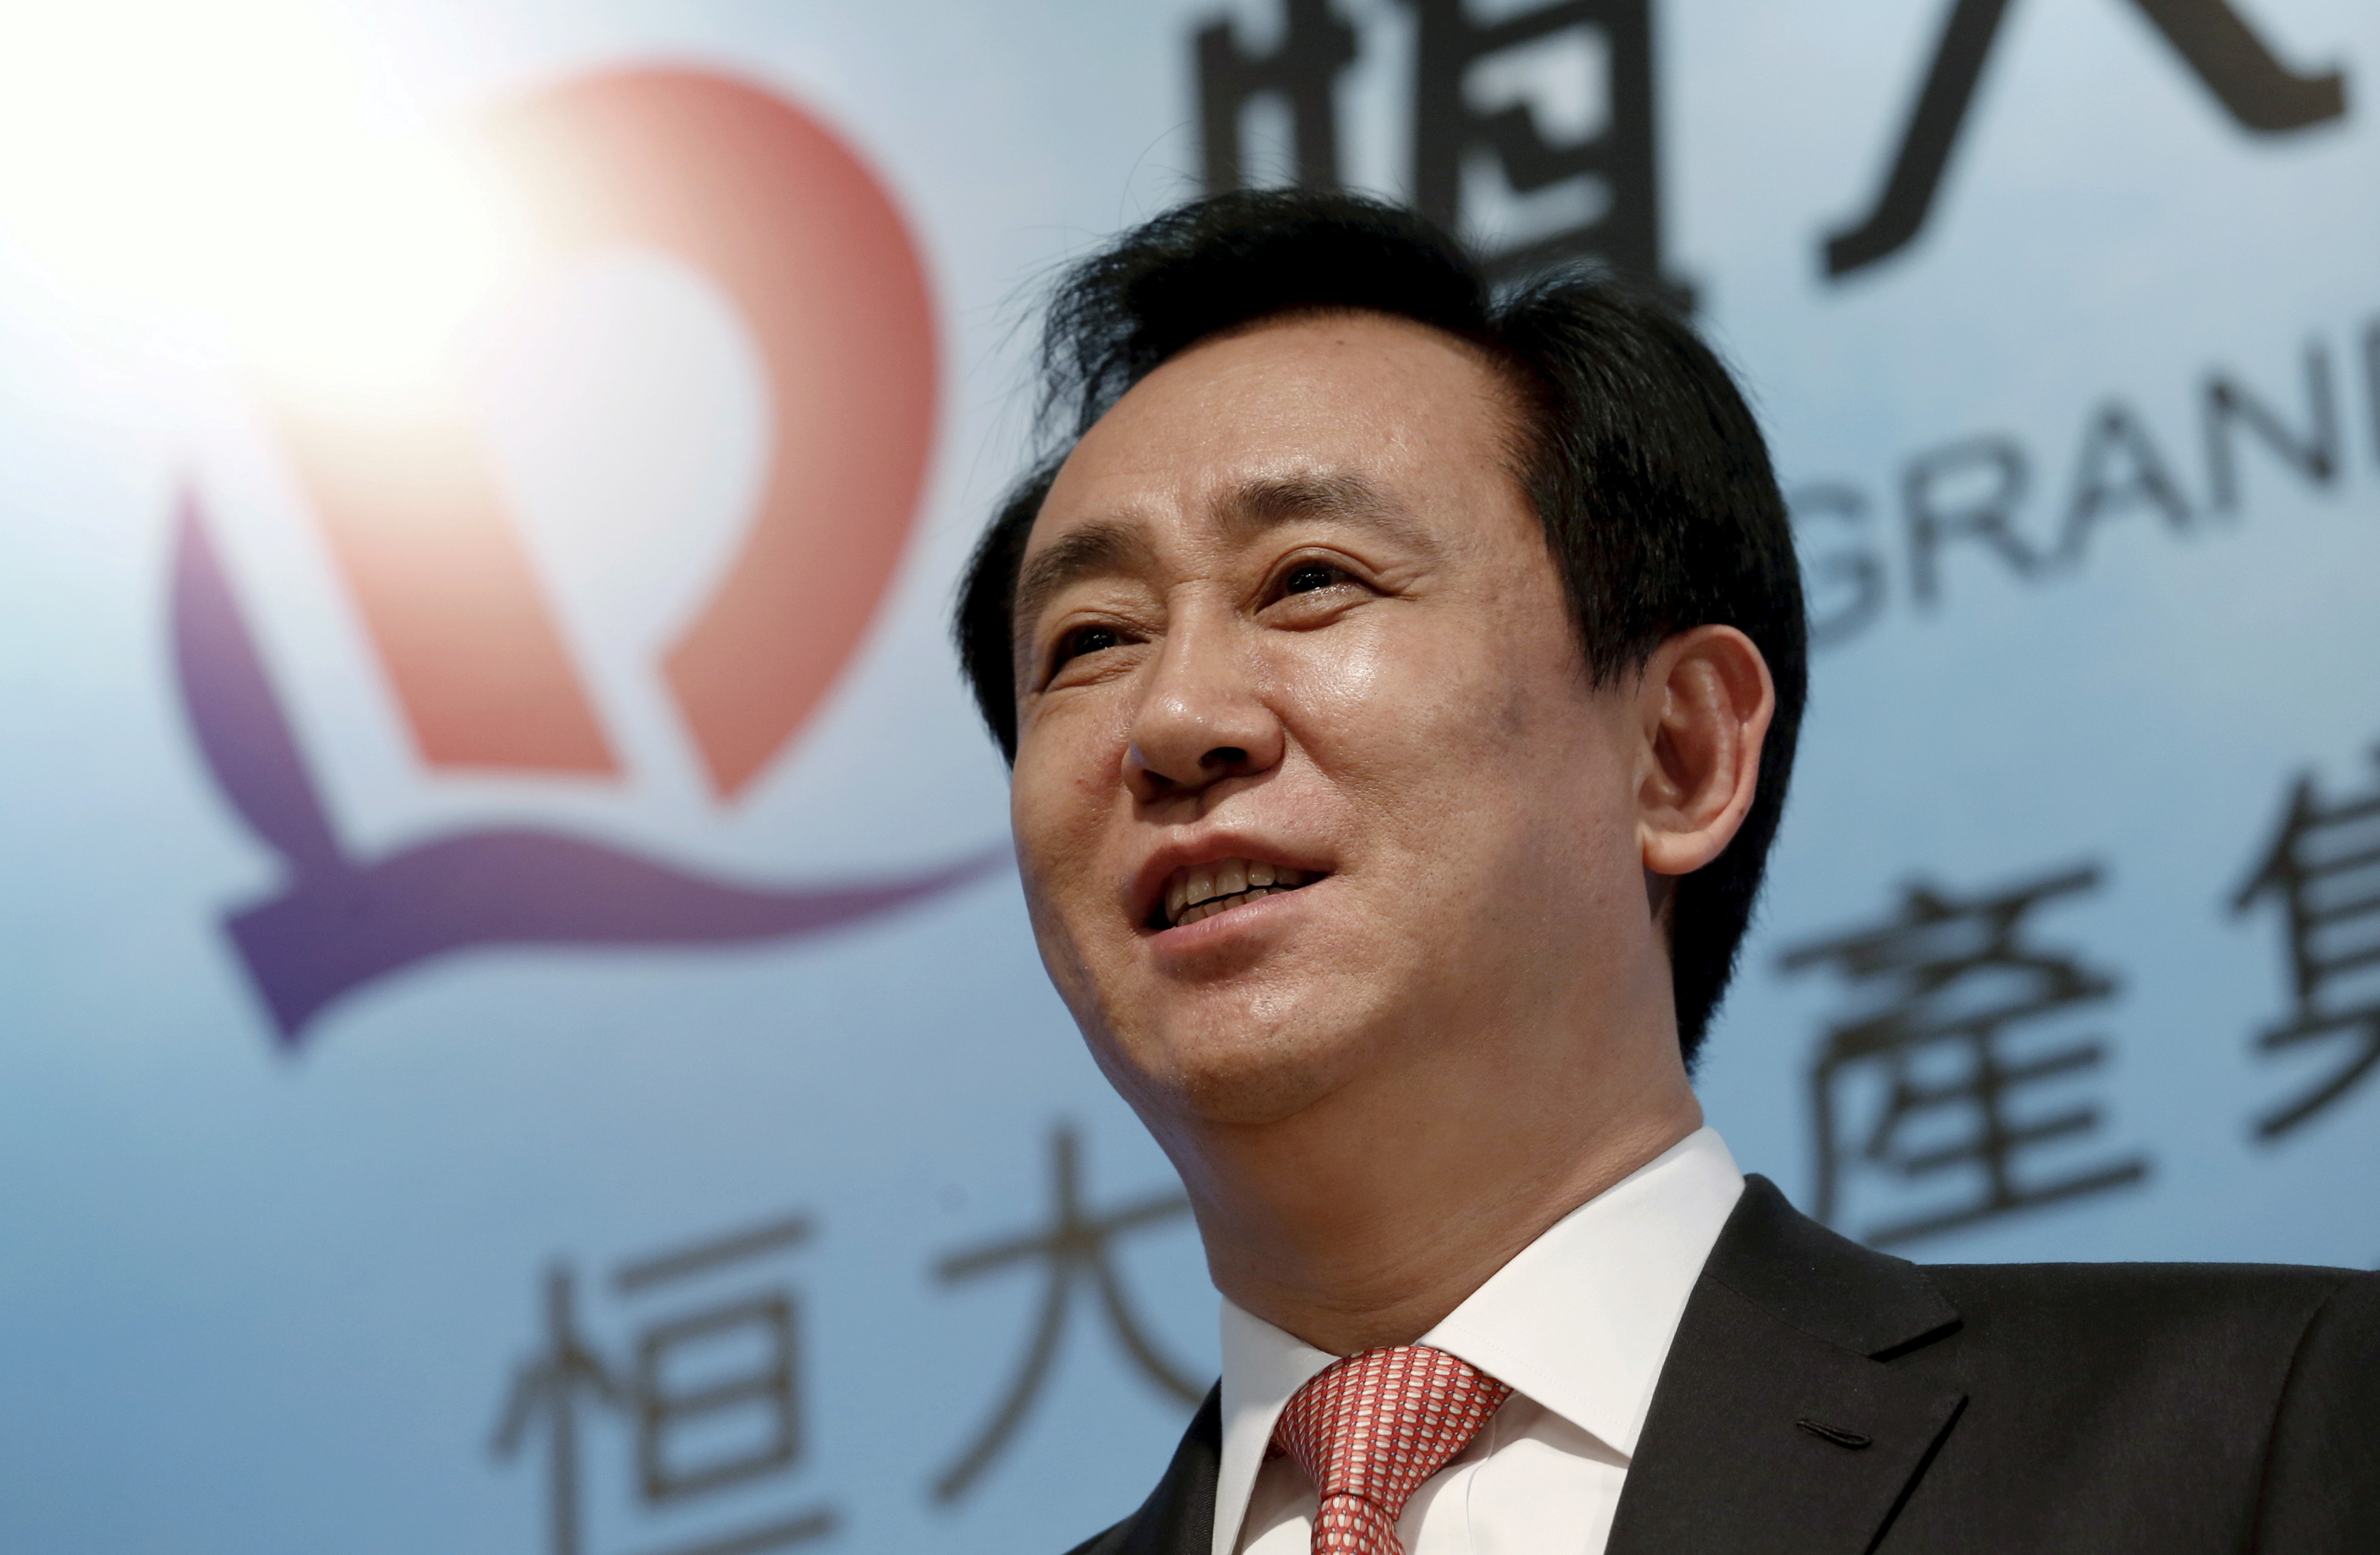 Hui Ka Yan, chairman of Evergrande Real Estate Group Ltd, attends a news conference on annual results in Hong Kong